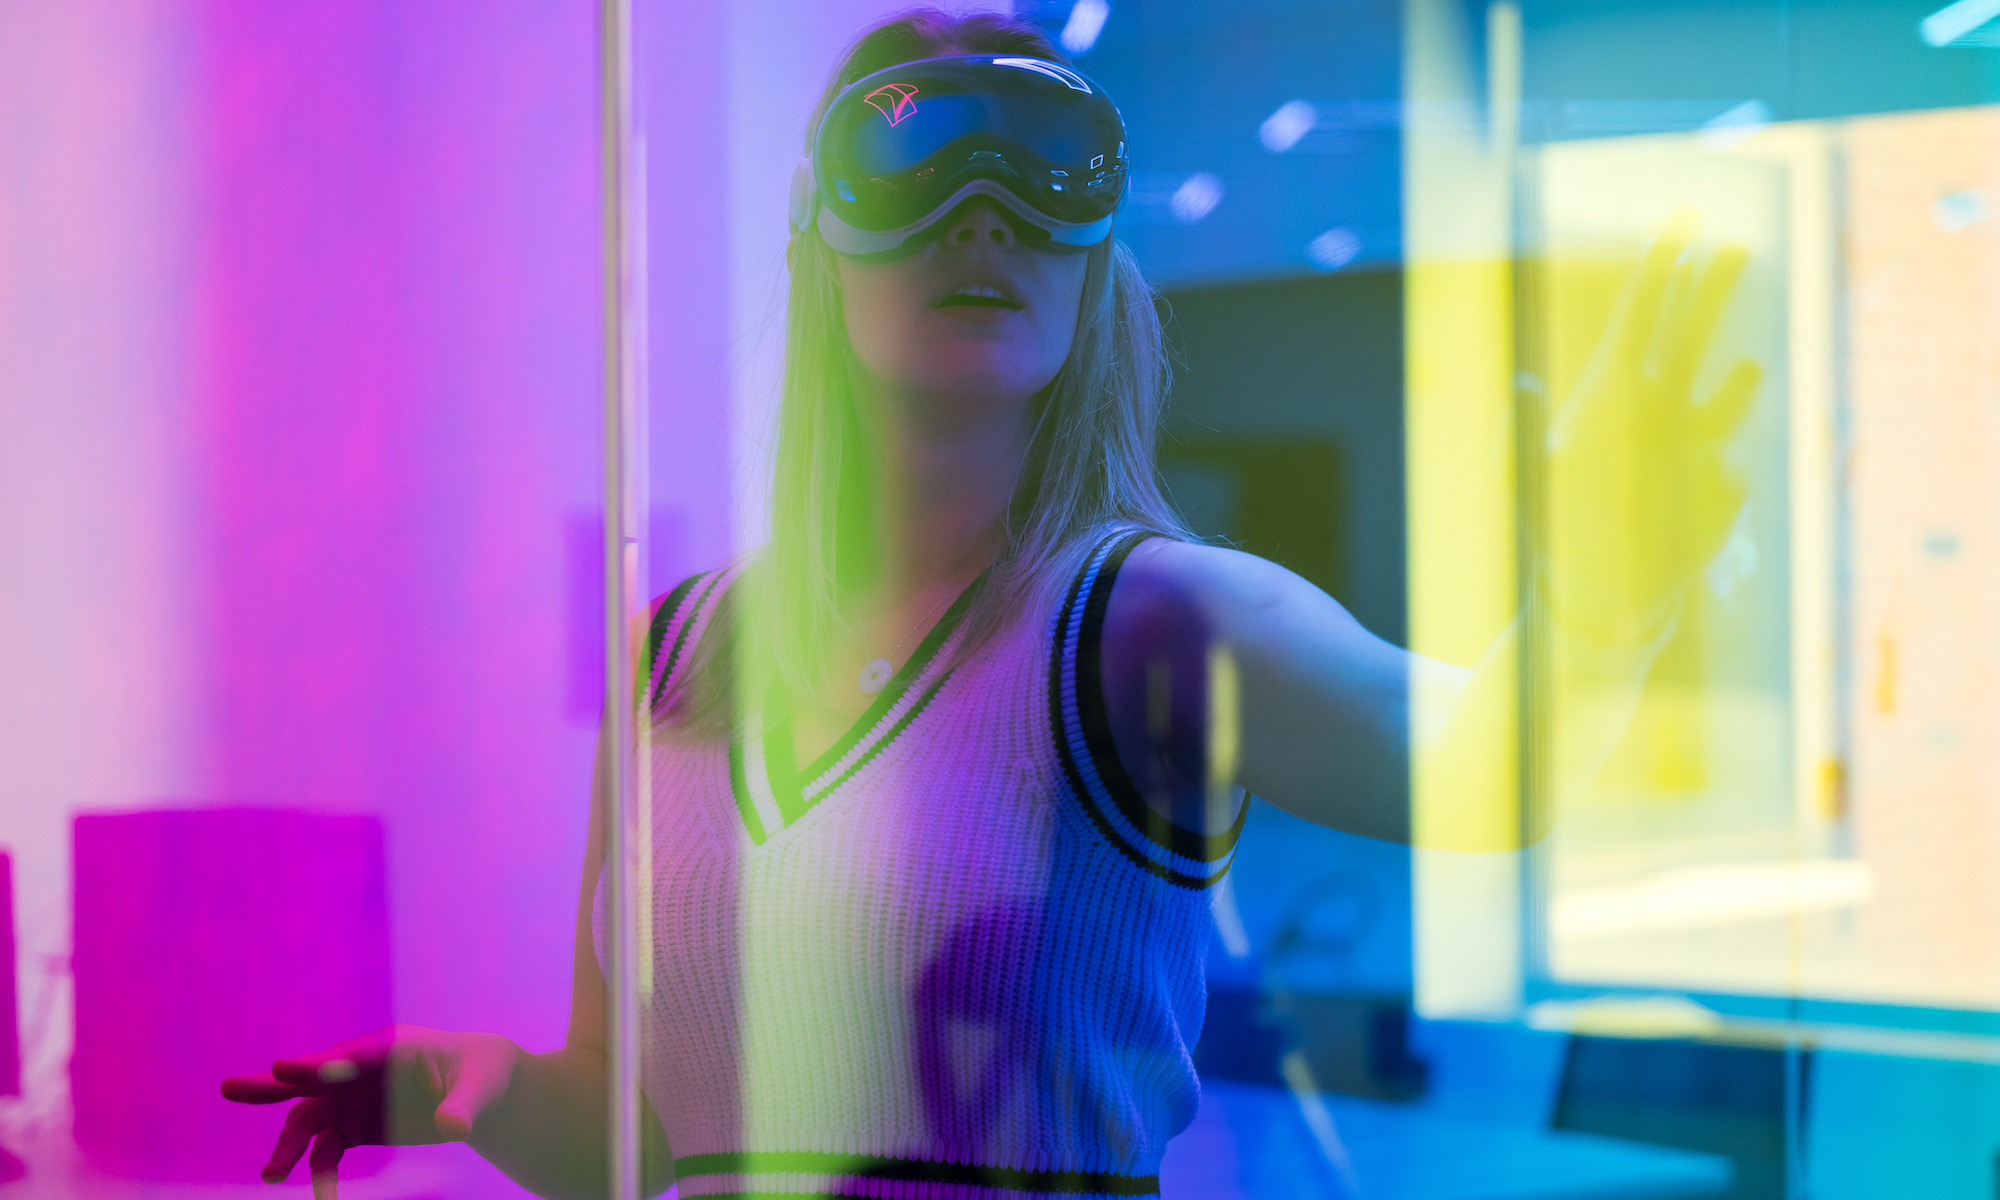 Student uses VR glasses and is pictured through a rainbow prism